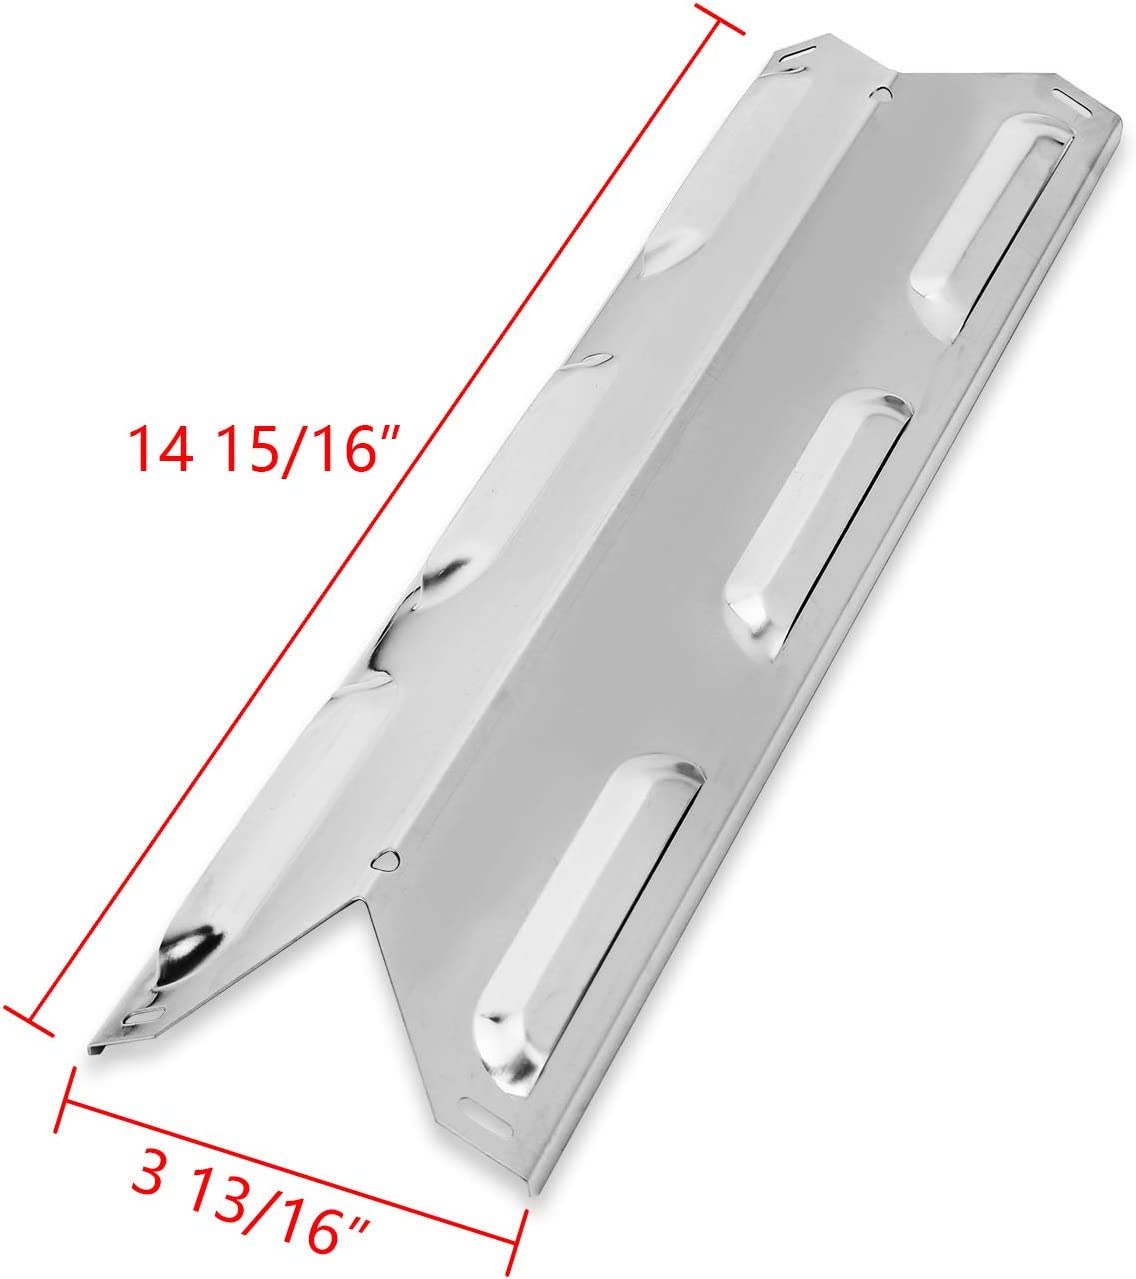 Set of four heat plates for Gas Grill Models from Char-broil, Kenmore, BBQ Pro and other manufacturers - image 2 of 5